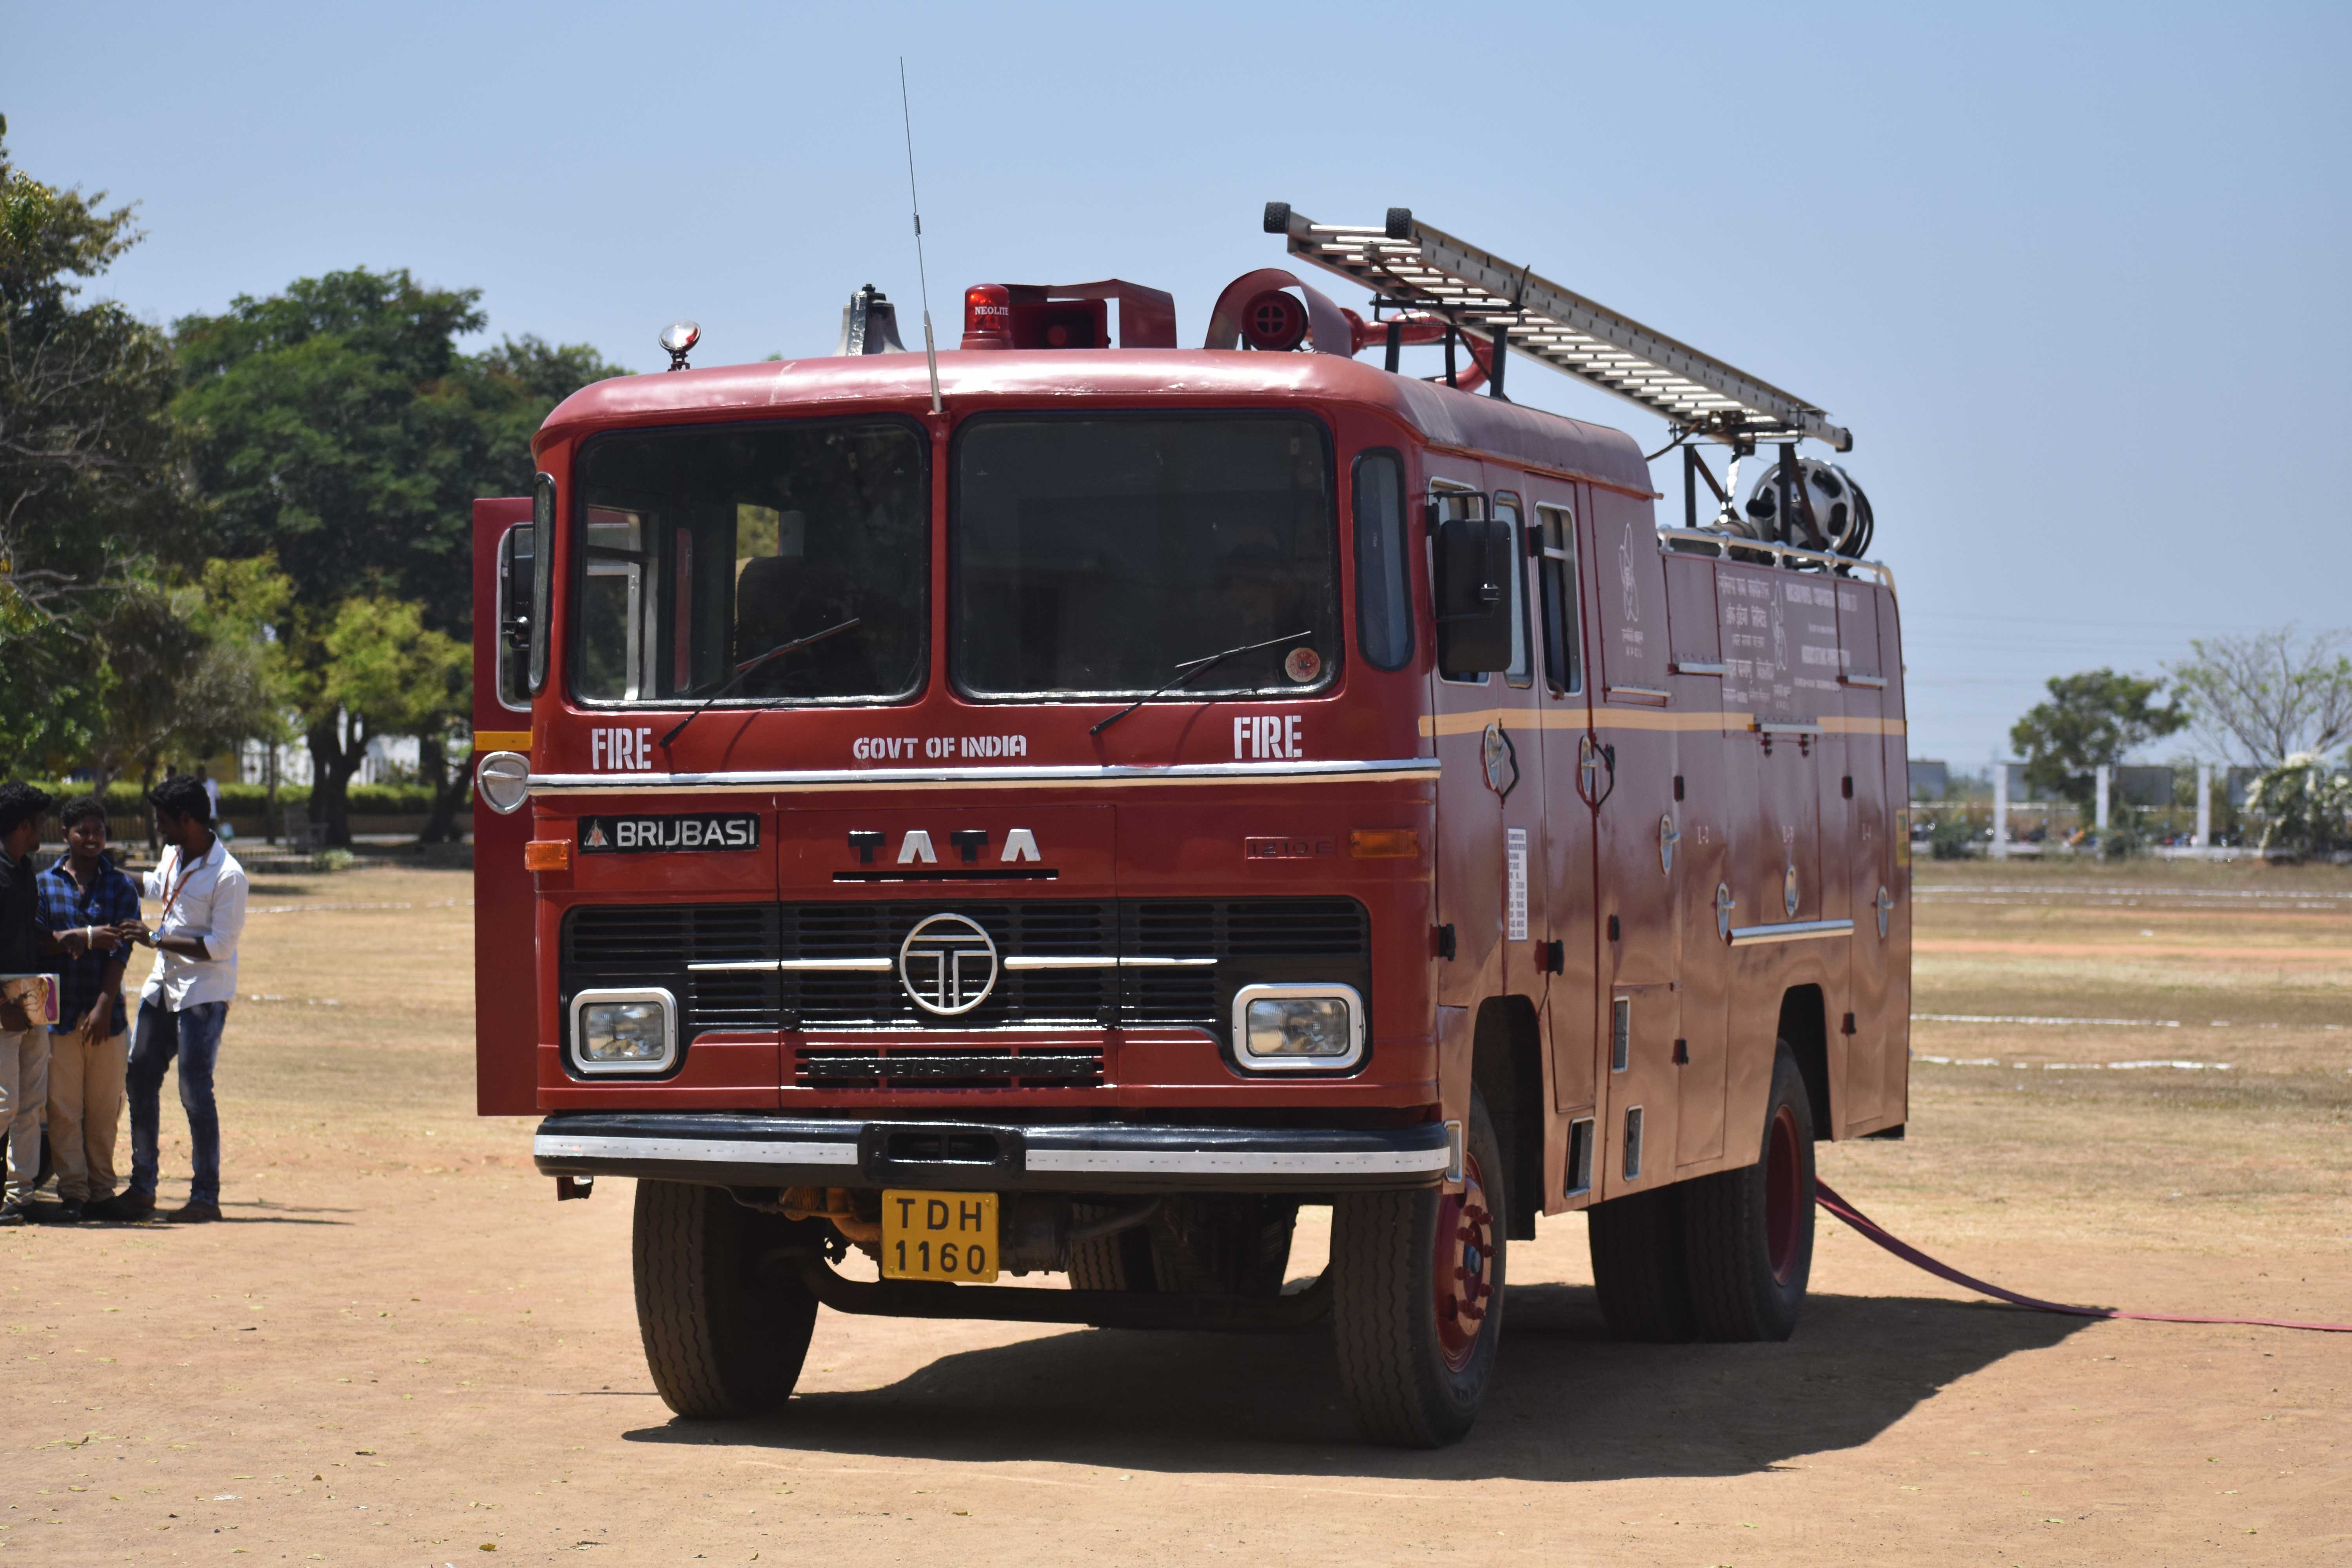 Fire Truck in AVIT for the Fire Safety Programme
